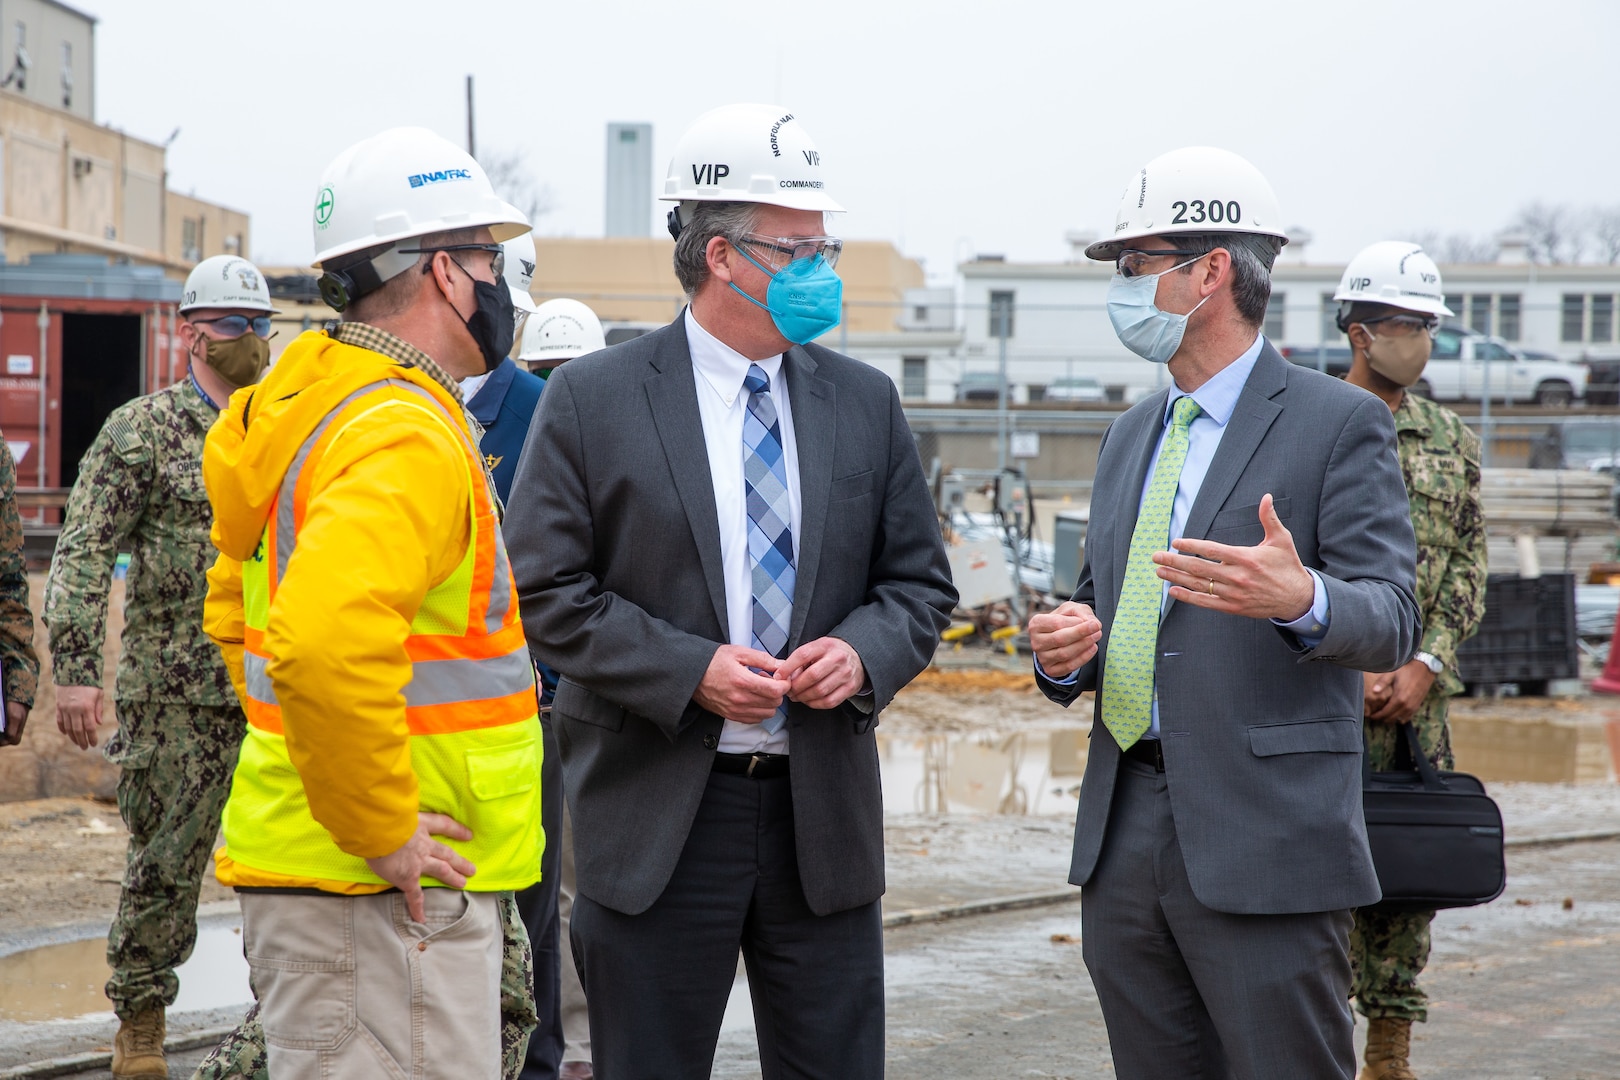 Acting Secretary of the Navy Thomas W. Harker speaks with Nuclear Engineering and Planning Manager Jeremy Largey during his visit to Norfolk Naval Shipyard March 17. Secretary Harker toured NNSY as part of a visit to the Mid-Atlantic region.